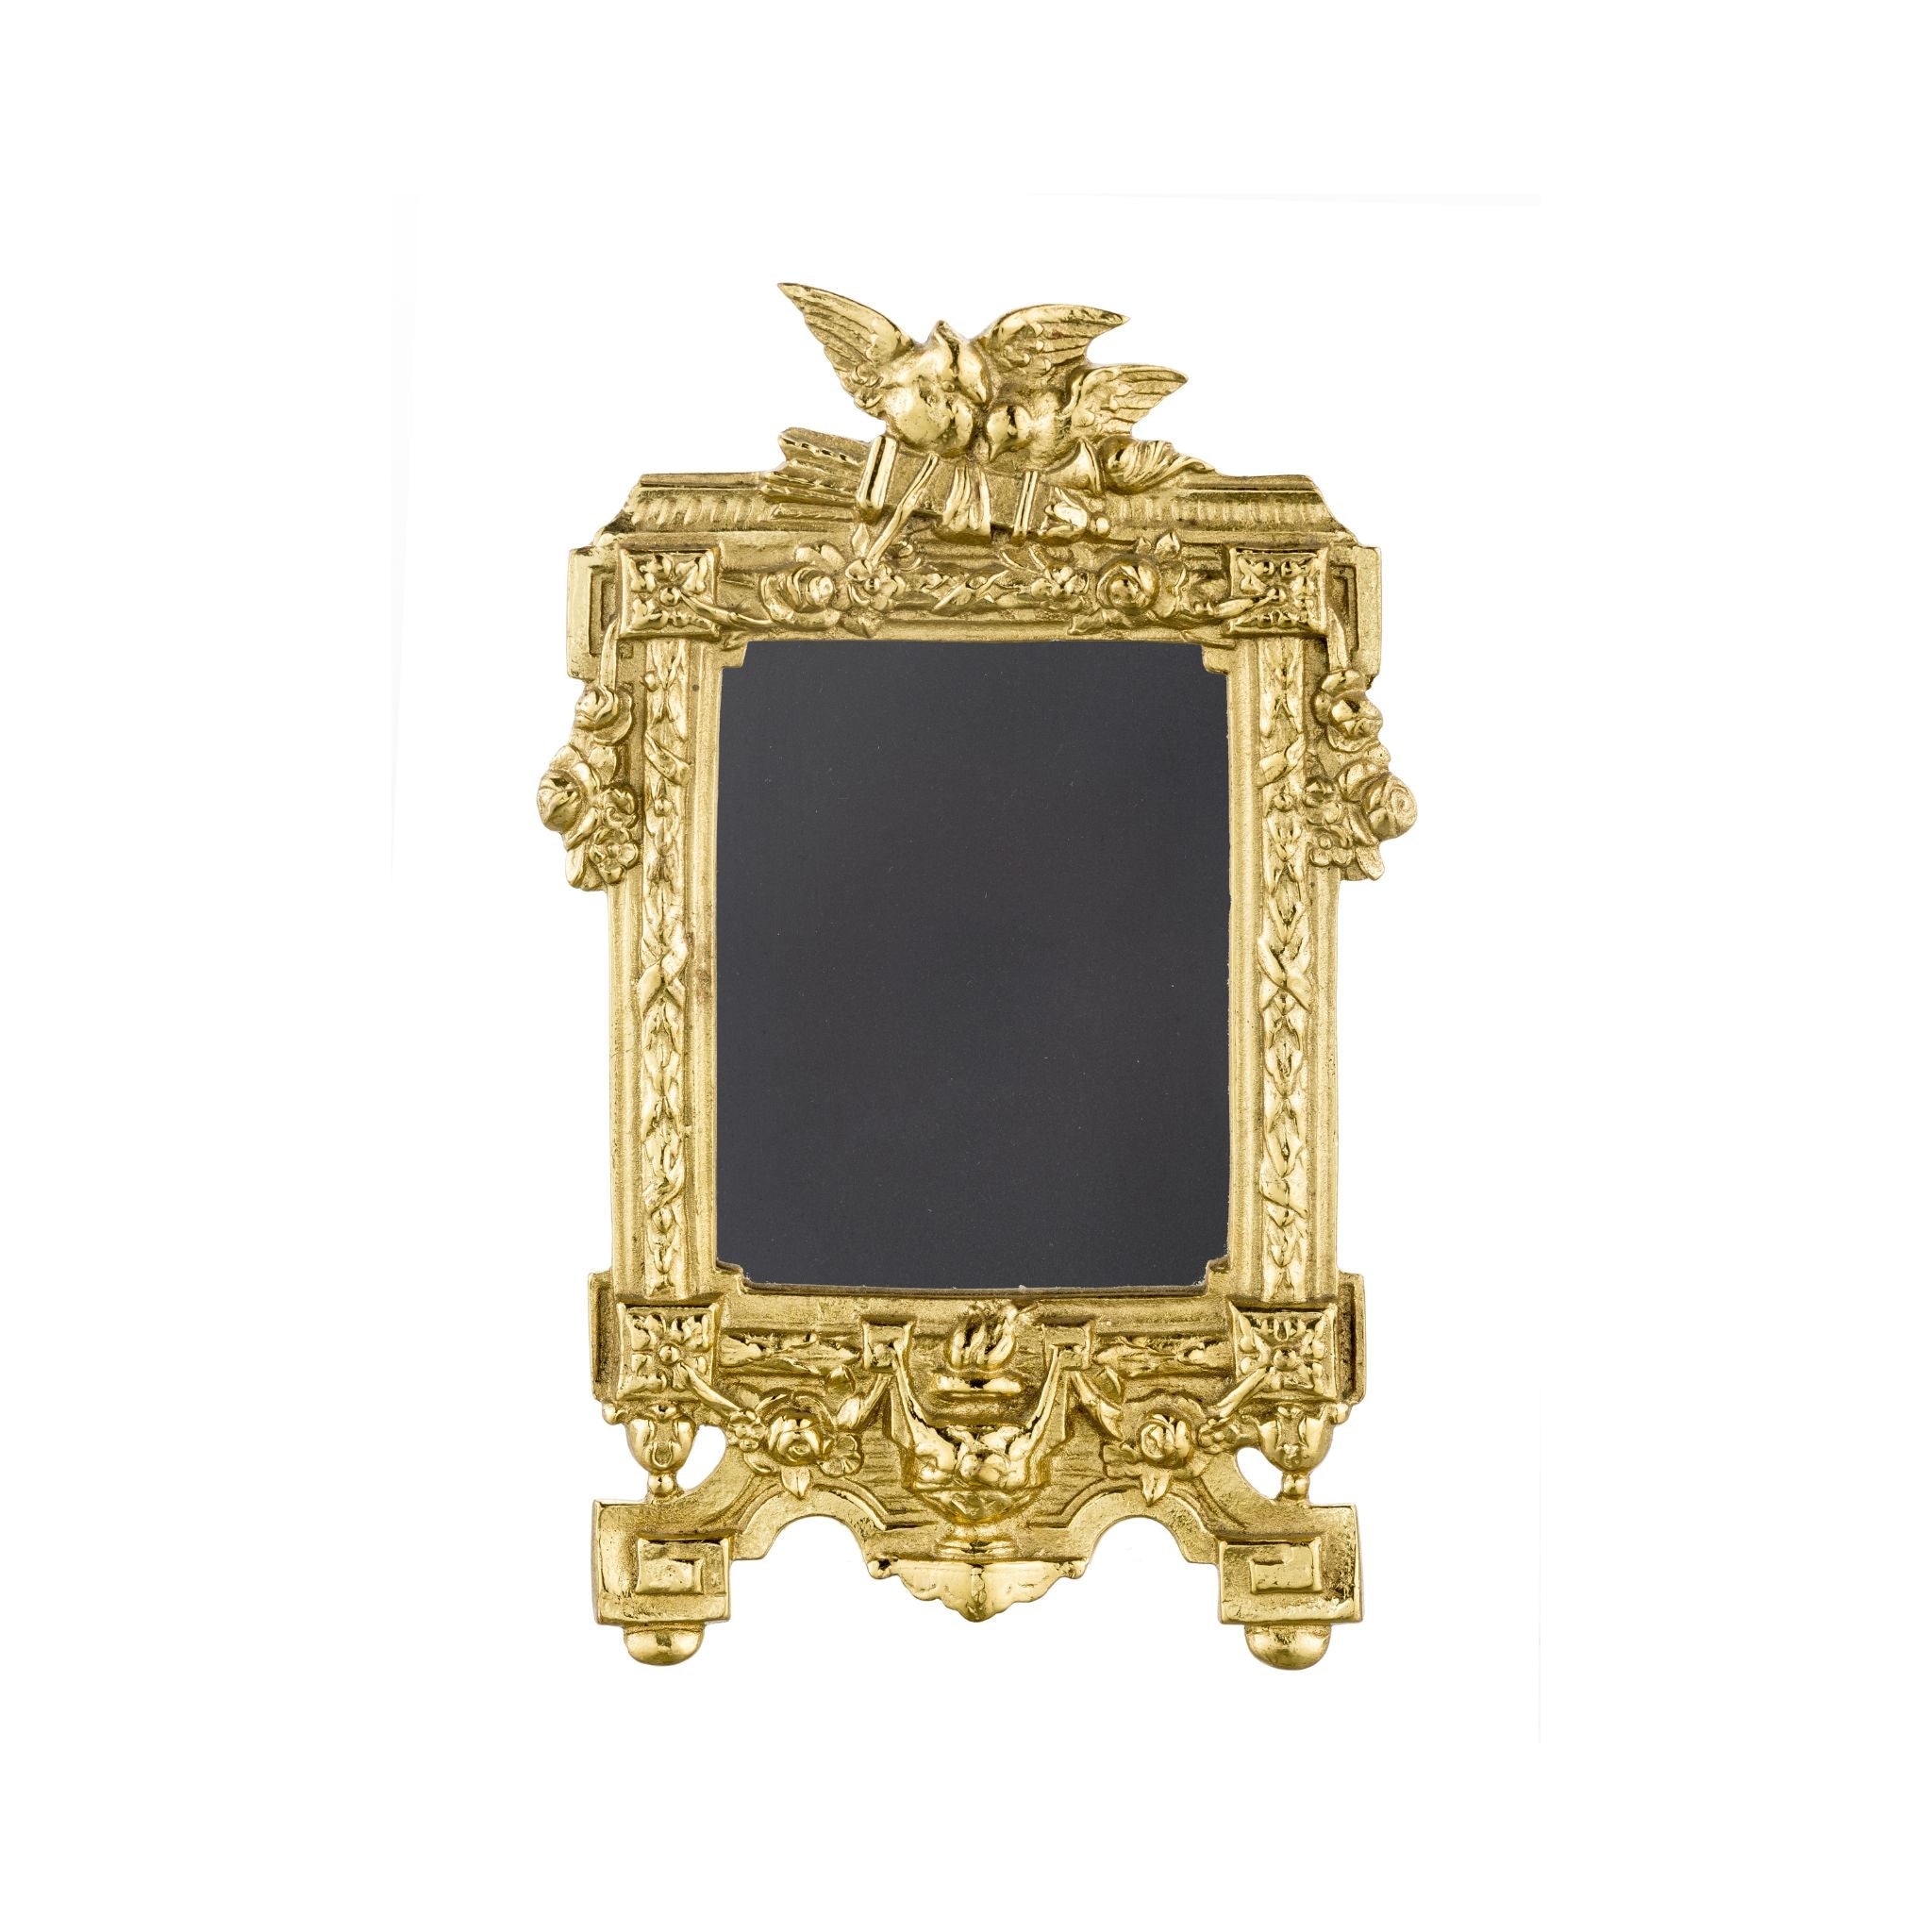 Sissi square brass frame with garland and doves - ilbronzetto